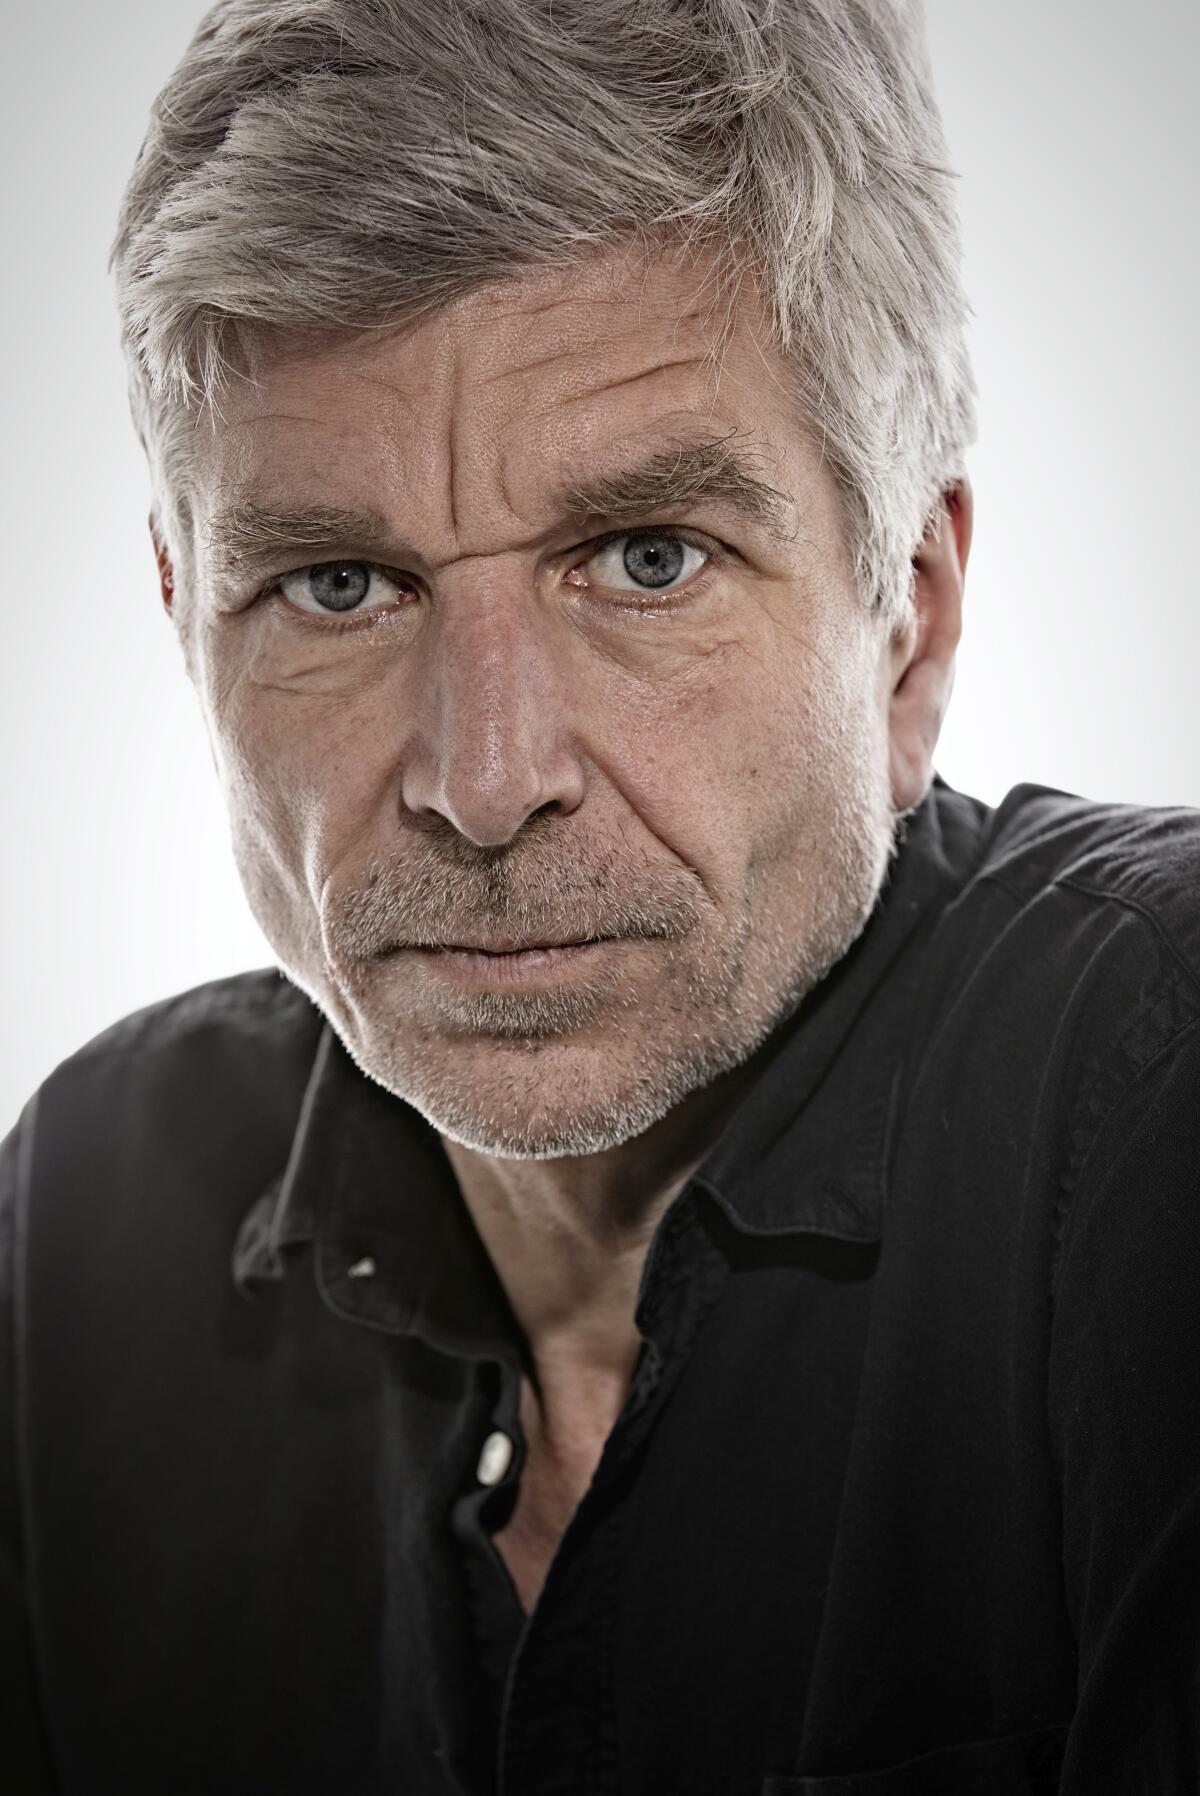 A gray-haired man looks directly into the camera